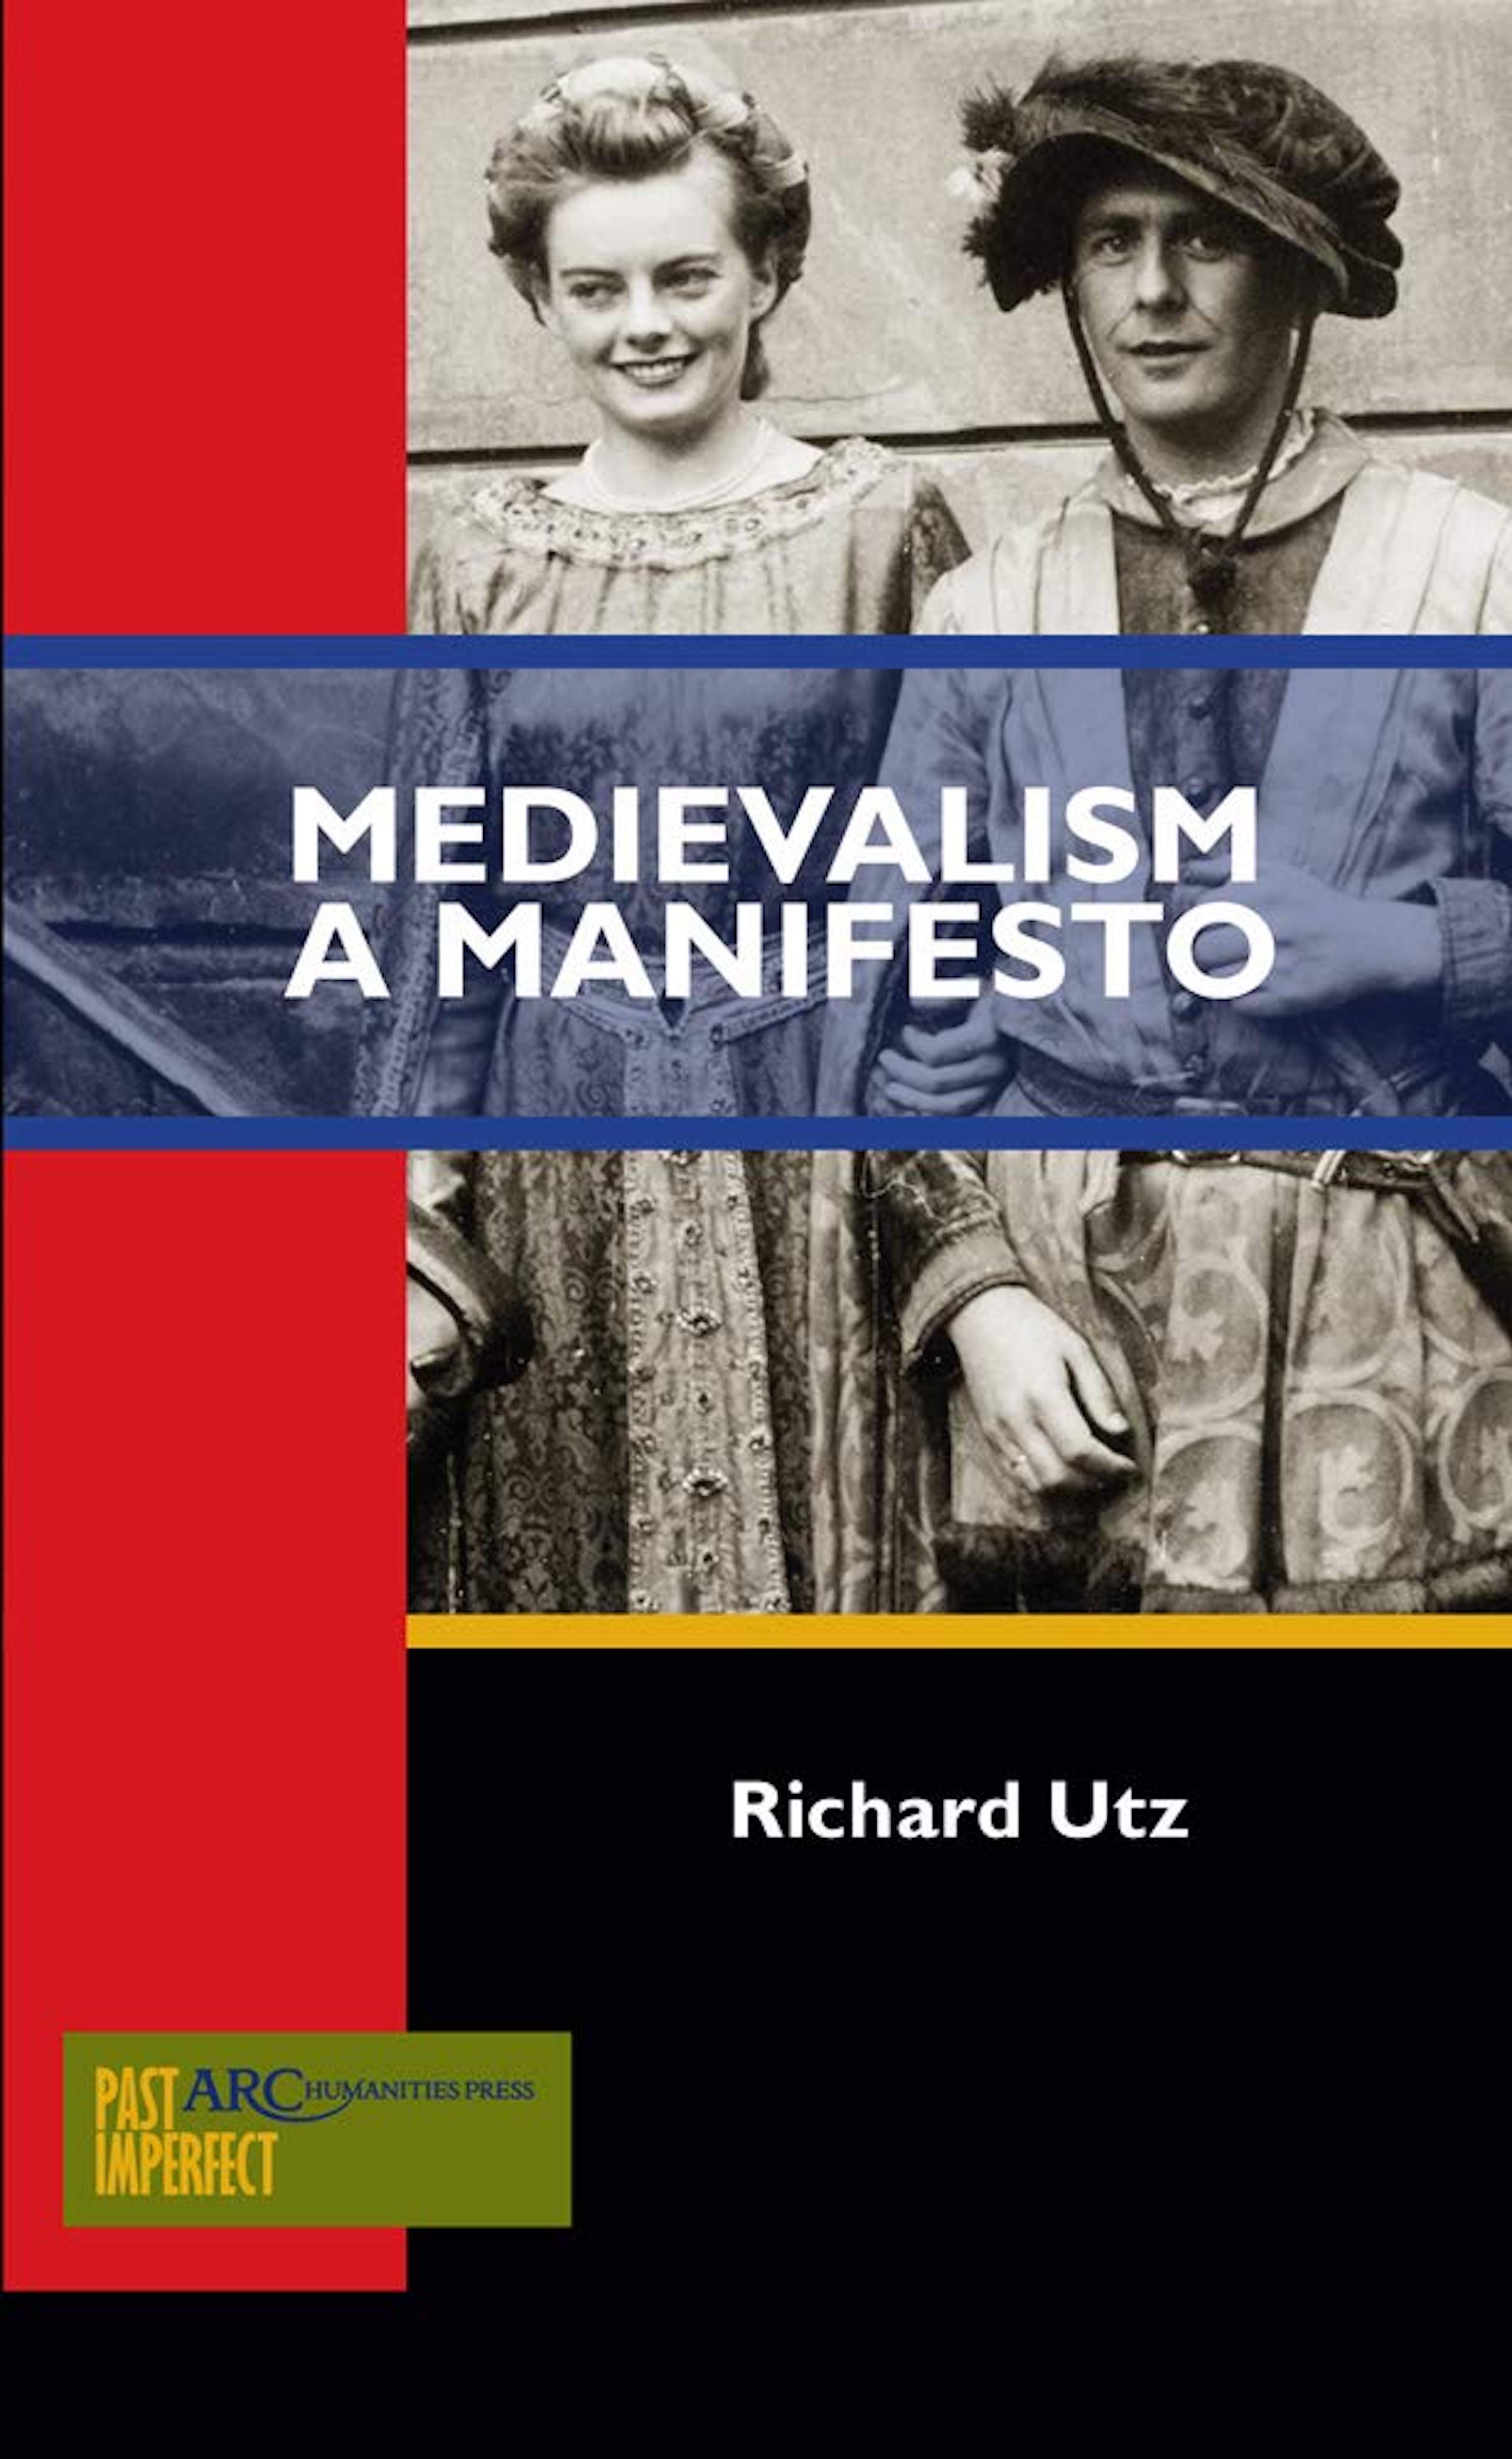 Review of Richard Utz, <i>Medievalism: A Manifesto, Past Imperfect</i> (Kalamazoo: ARC Humanities Press, 2017), in <i>The Medieval Review</i> (2020). [N. Altschul]